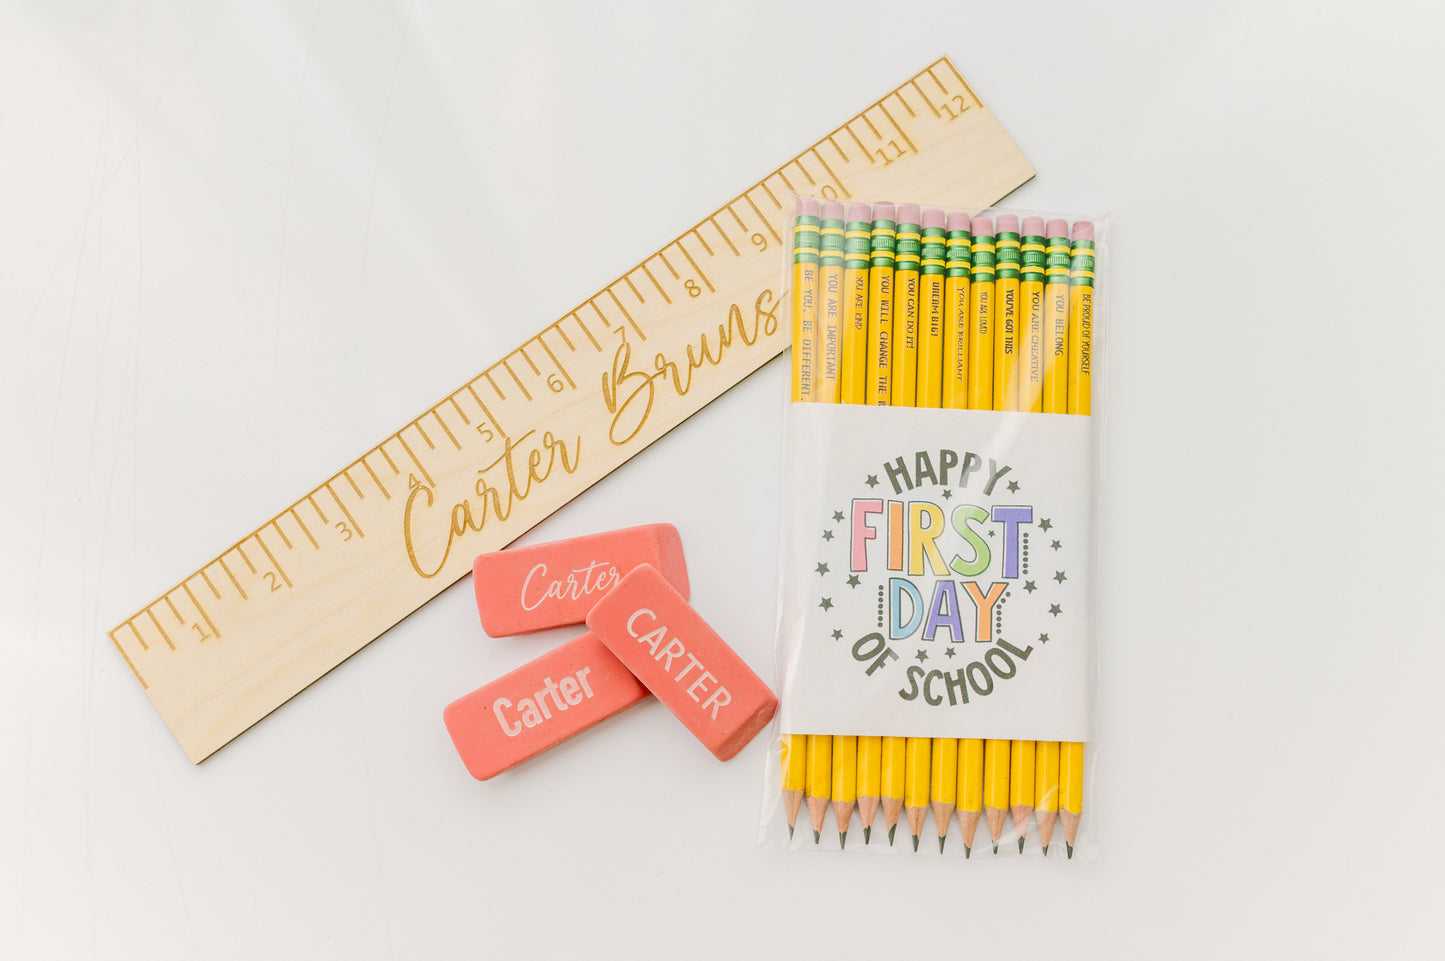 Personalized Wooden Ruler